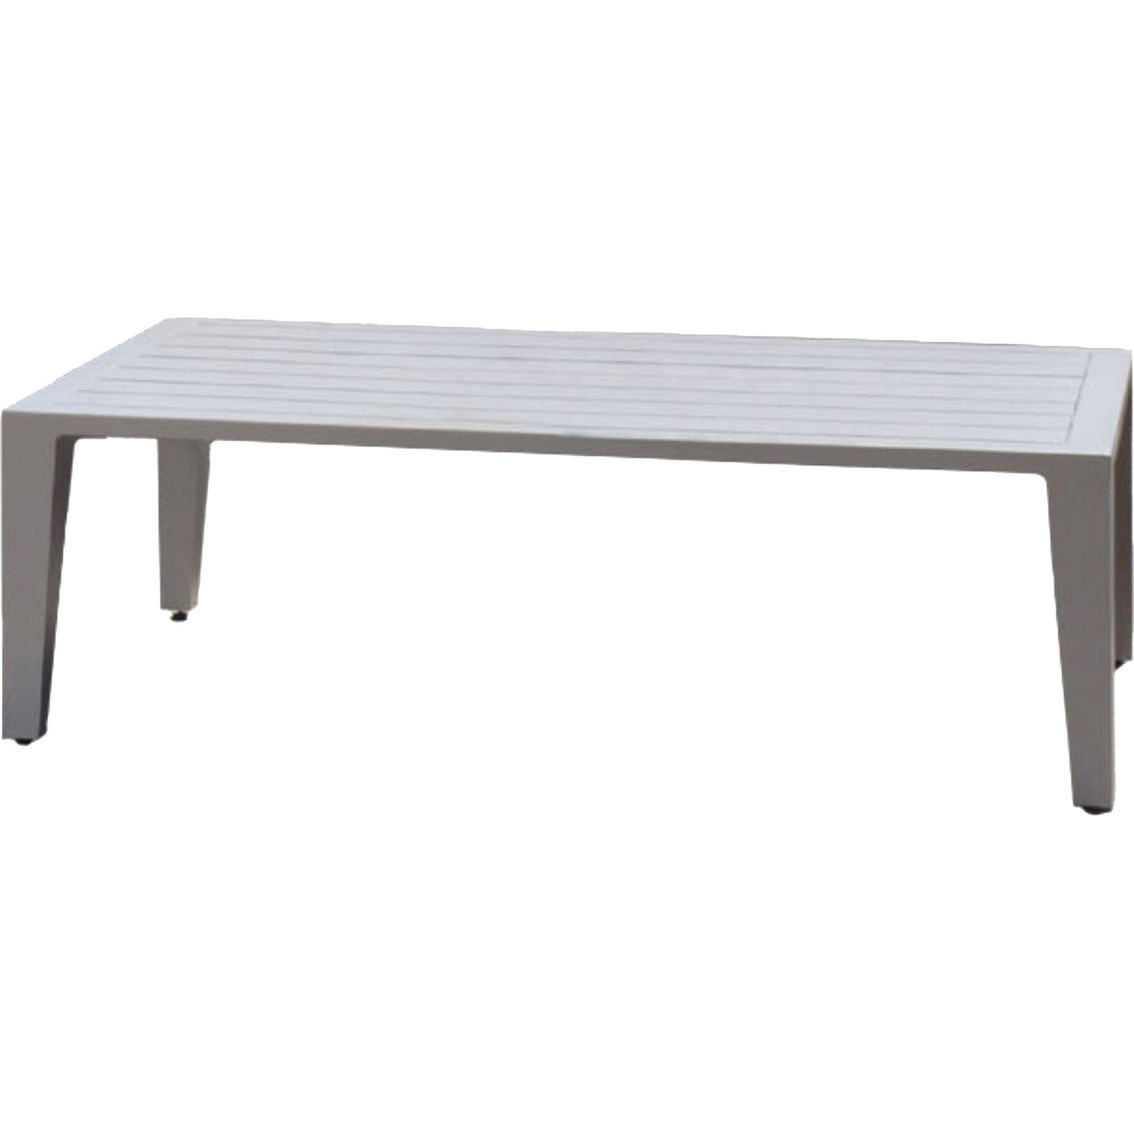 Abbyson Hyland Hills Seating Set Coffee Table - Image 2 of 3